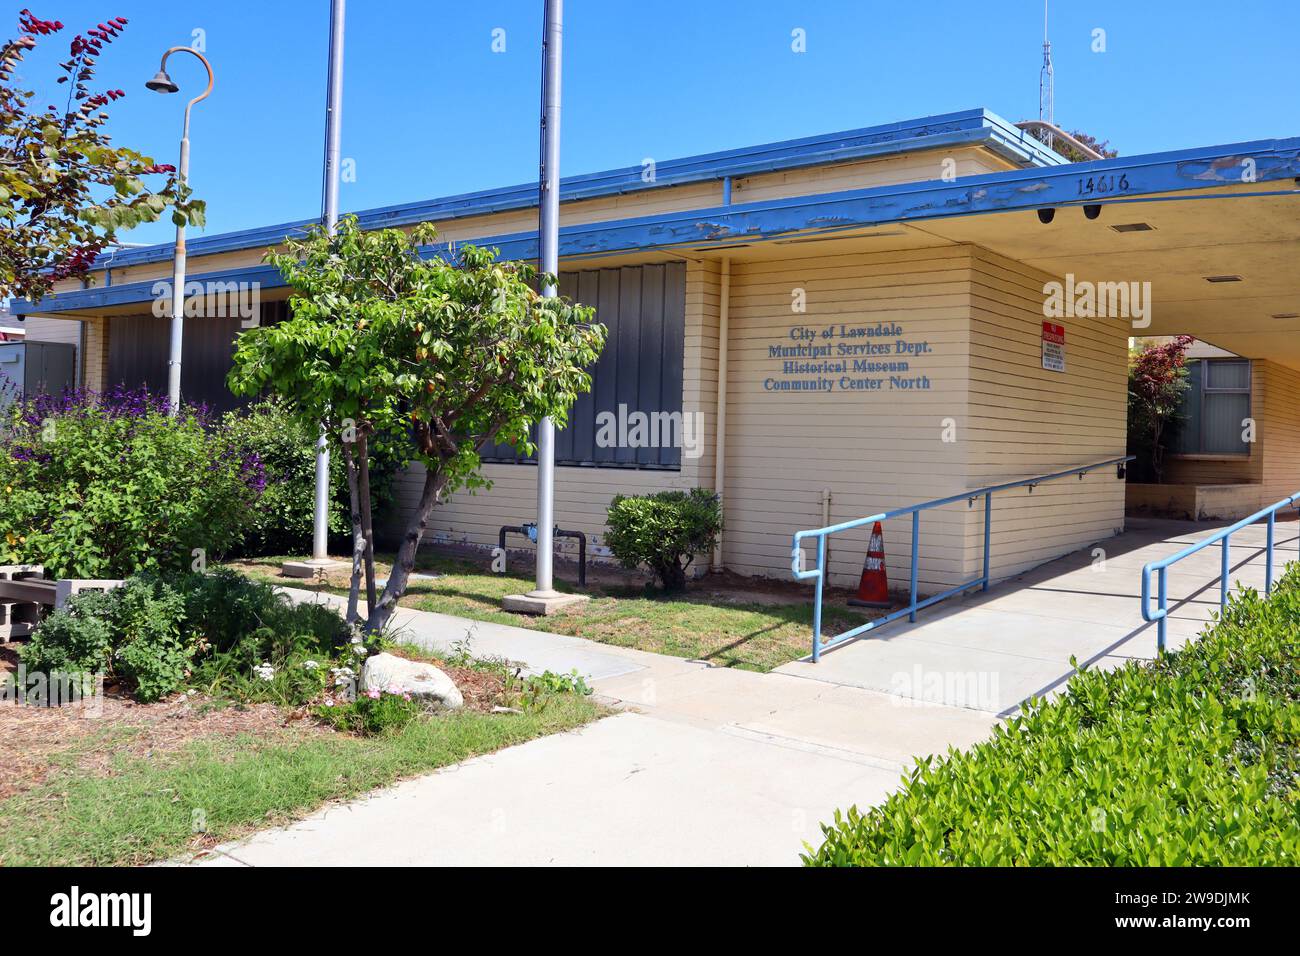 Lawndale, California: LAWNDALE Municipal Services Department, Historical Museum and Community Center North Stock Photo